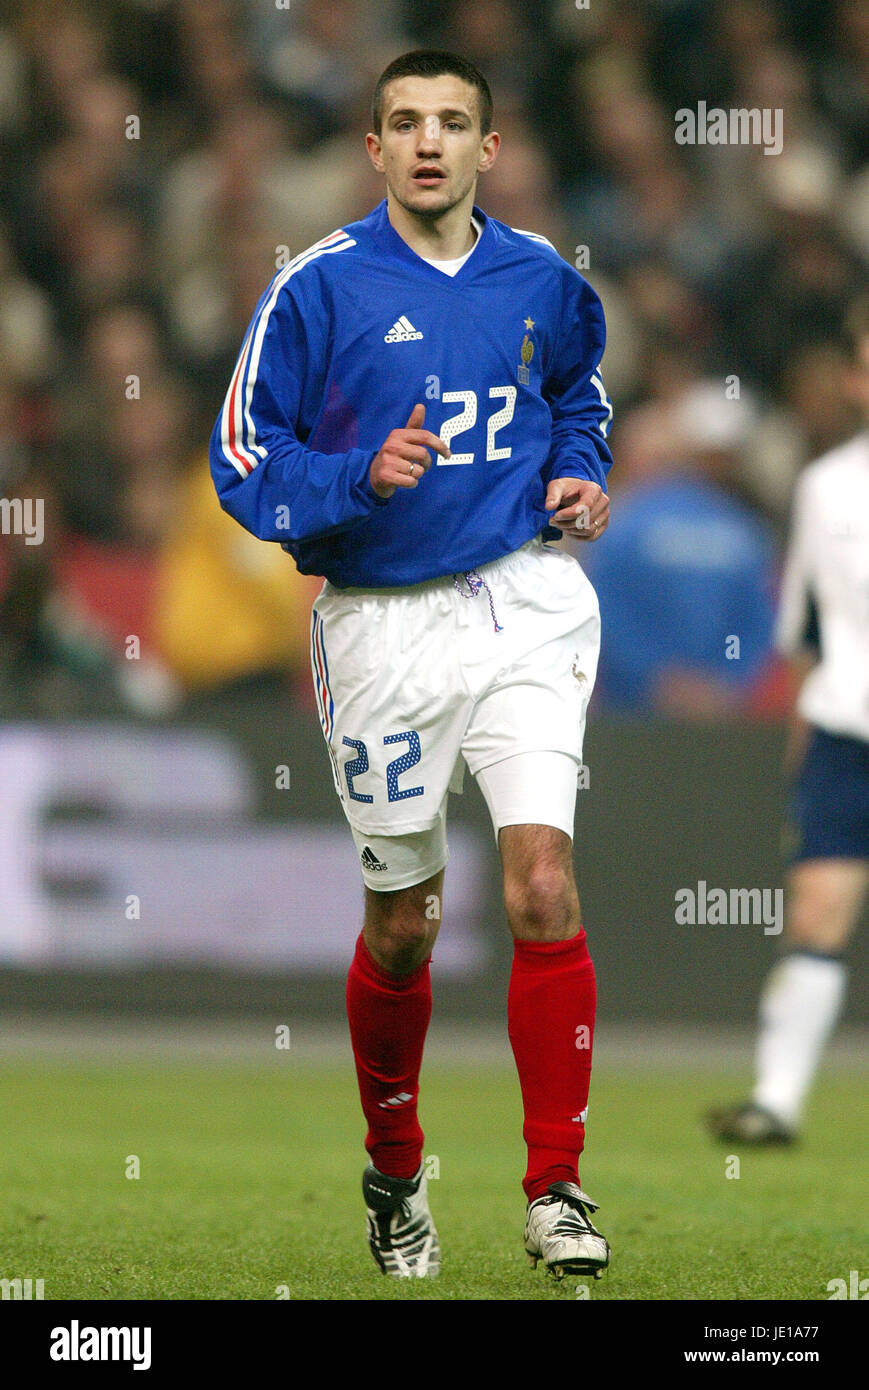 ERIC CARRIERE FRANCE STADE FRANCE PARIS 27 March 2002 Stock Photo - Alamy